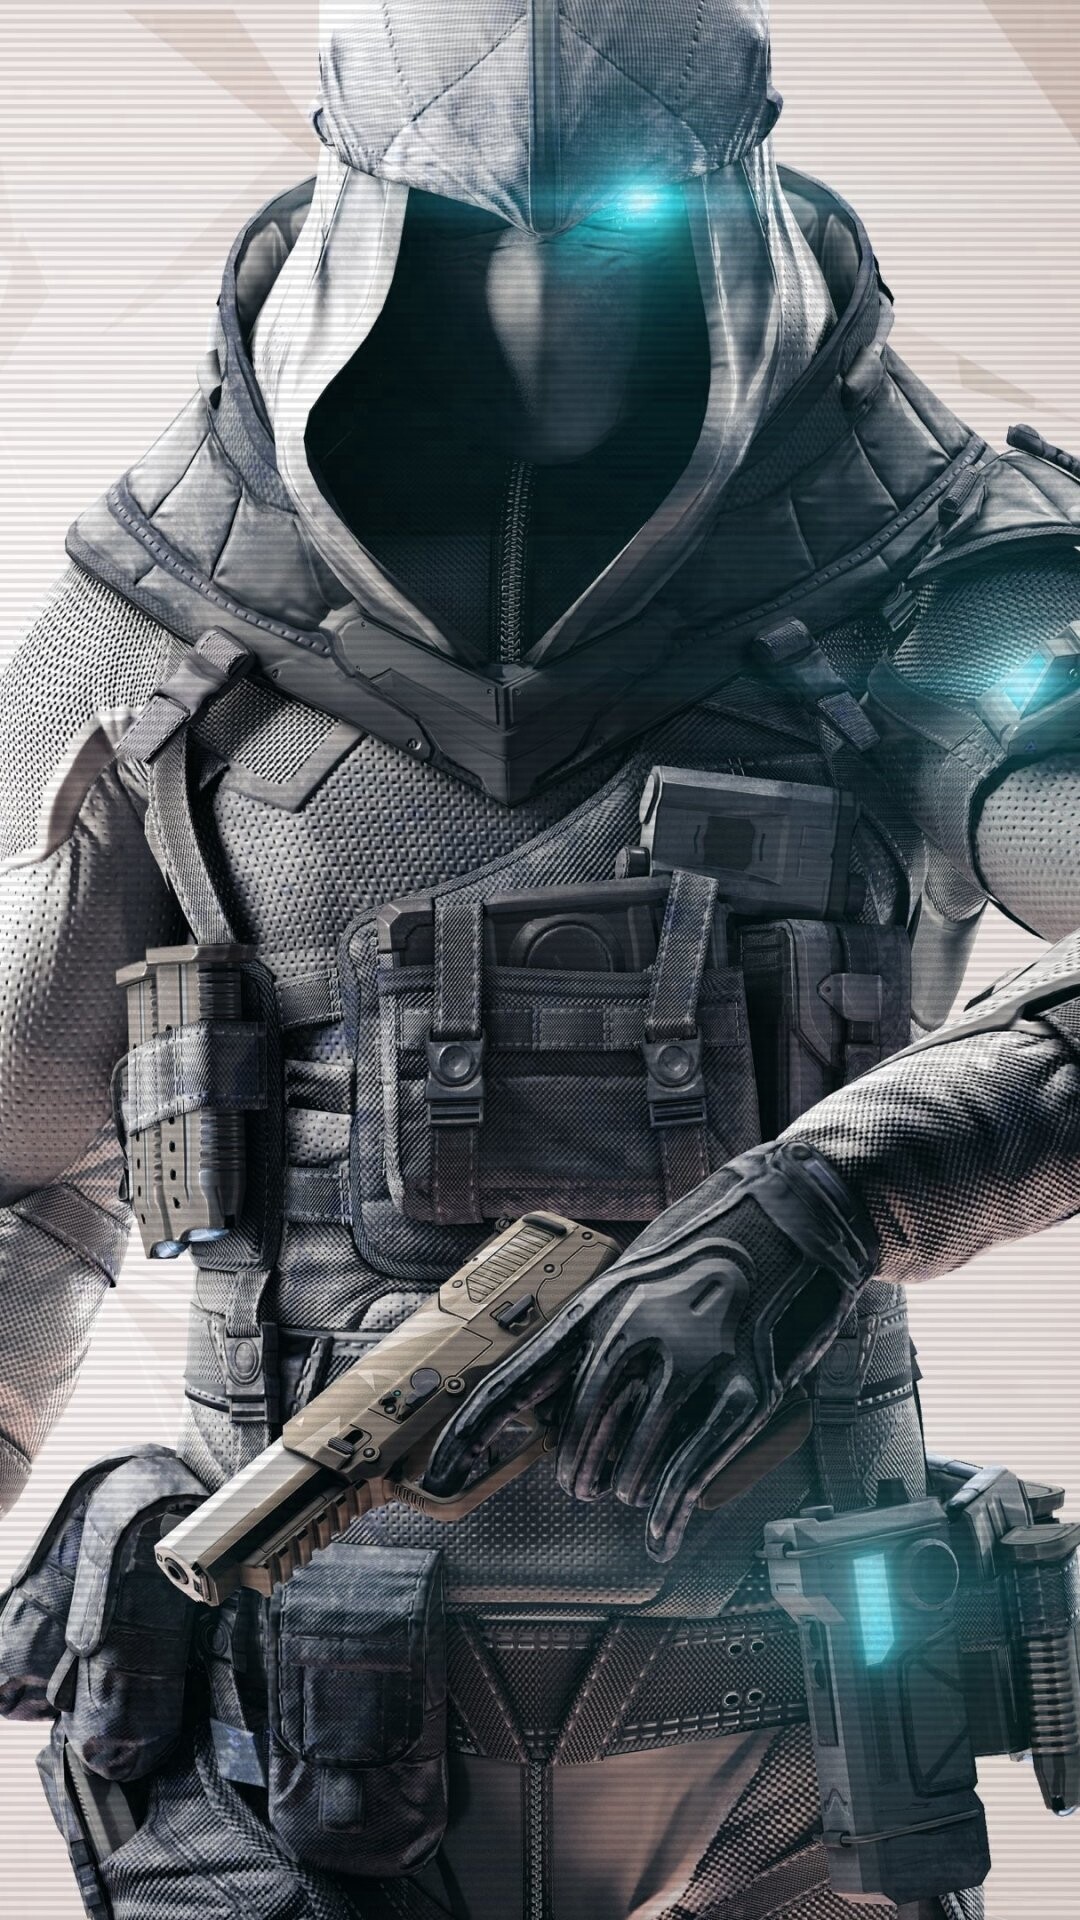 Ghost Recon: Future Soldier: Covert Operations Sniper armed with FN Five-Seven semi-automatic pistol, Action shooter. 1080x1920 Full HD Wallpaper.